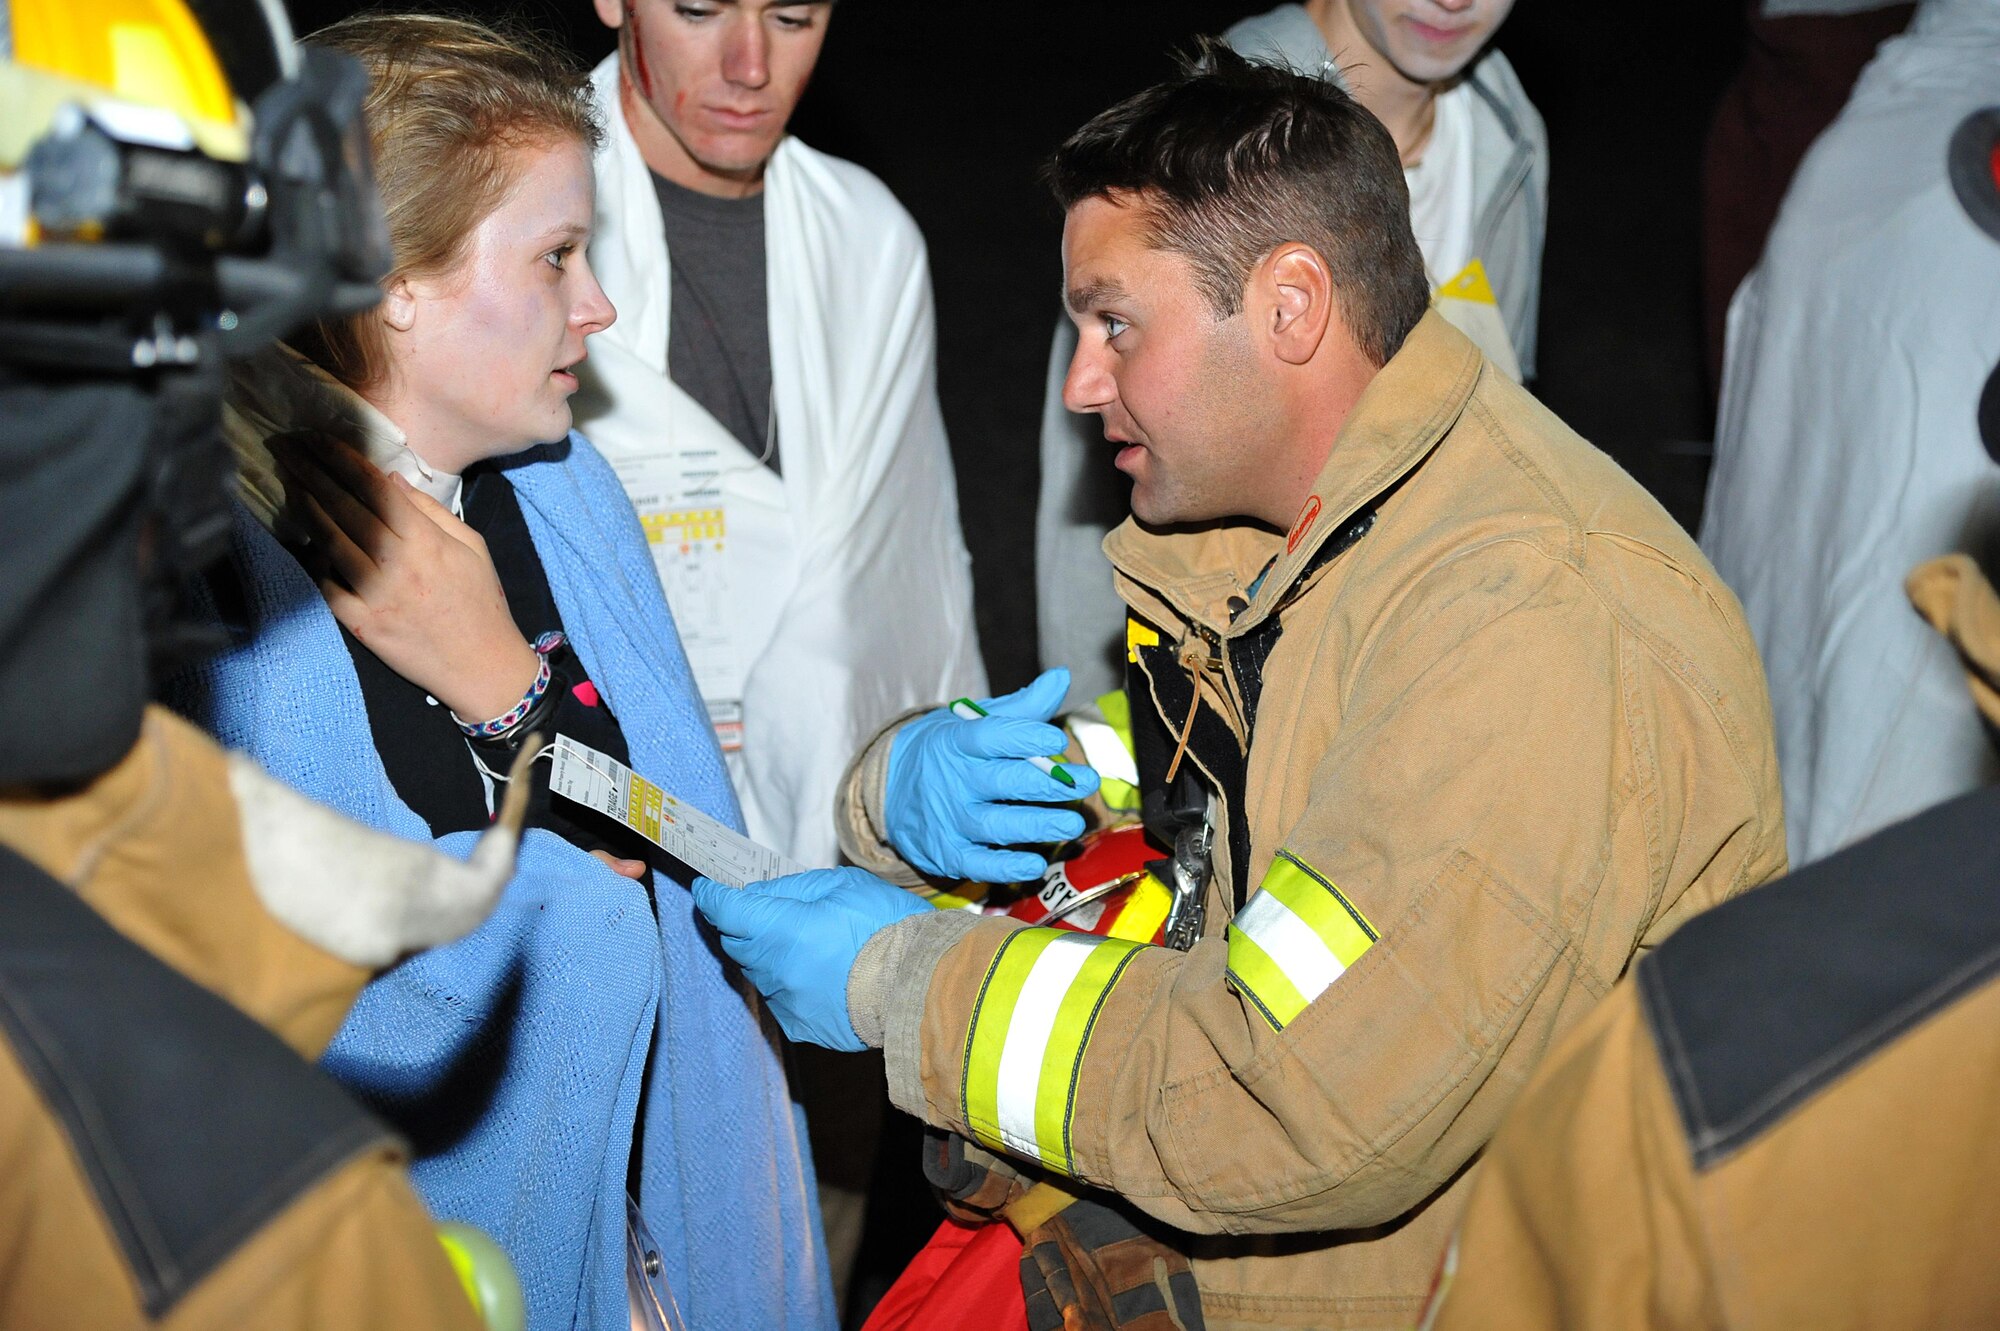 Grand Forks area firefighters practice assisting volunteer victims of a simulated plane crash during an exercise at the Grand Forks International Airport, N.D., Sept. 21, 2016. Grand Forks AFB firefighters joined area fire depts. and other first responders for a community effort to develop readiness for emergency response. (U.S. Air Force photo by Airman 1st Class Elijaih Tiggs)